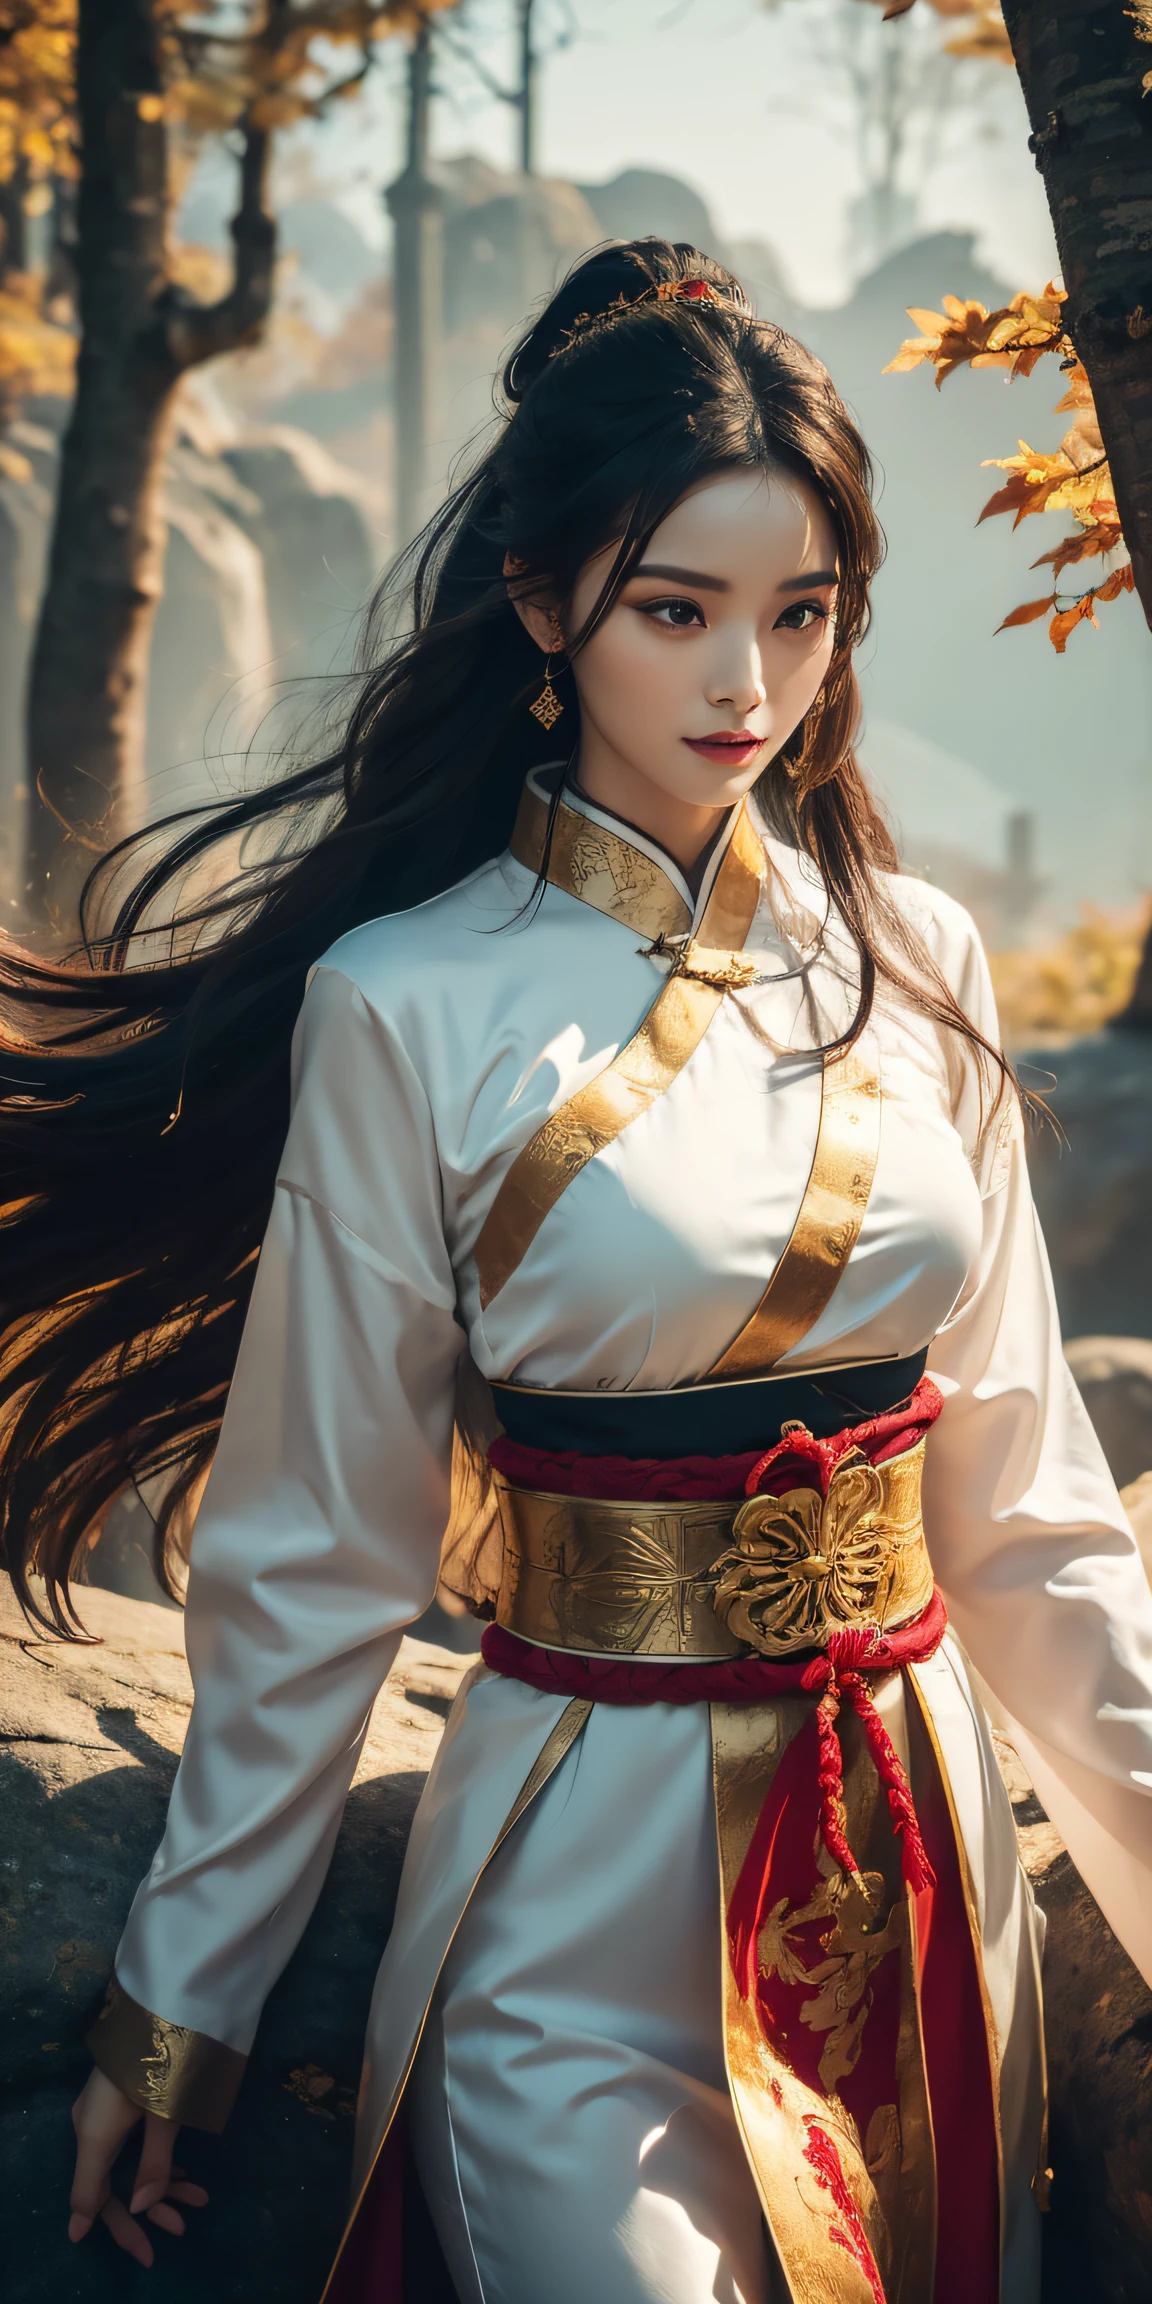 Beautiful Woman, Chinese martial arts, martial arts expert woman, 26 year old adult, Slim Body, Medium chest, height 170cm, tall sexy woman, traditional chinese dress, fabric high quality silk, Fabric ultra high quality, There is a lot of light reflection., it&#39;Long dress with white collar and red lining.., Gorgeous phoenix embroidery with gold thread, golden decoration on black belt, Long hair, Black hair, beautifull face, Heavy makeup, dark lipstick, Cold and scary eyes with blue light flowing through them, sharp eyes, Looking at the viewer. Beautiful smile, Elegant hair blowing in the wind, very weak waves, deep blue autumn sky, portrait pose, Sedentary Woman, View from head to waist, Chinese woman resting on a rock in the forest, UHD, ccurate, Masterpiece, Anatomically accurate., textured skin, super detaill, high detailed, High Quality, Best Quality, high resolucion, 4k